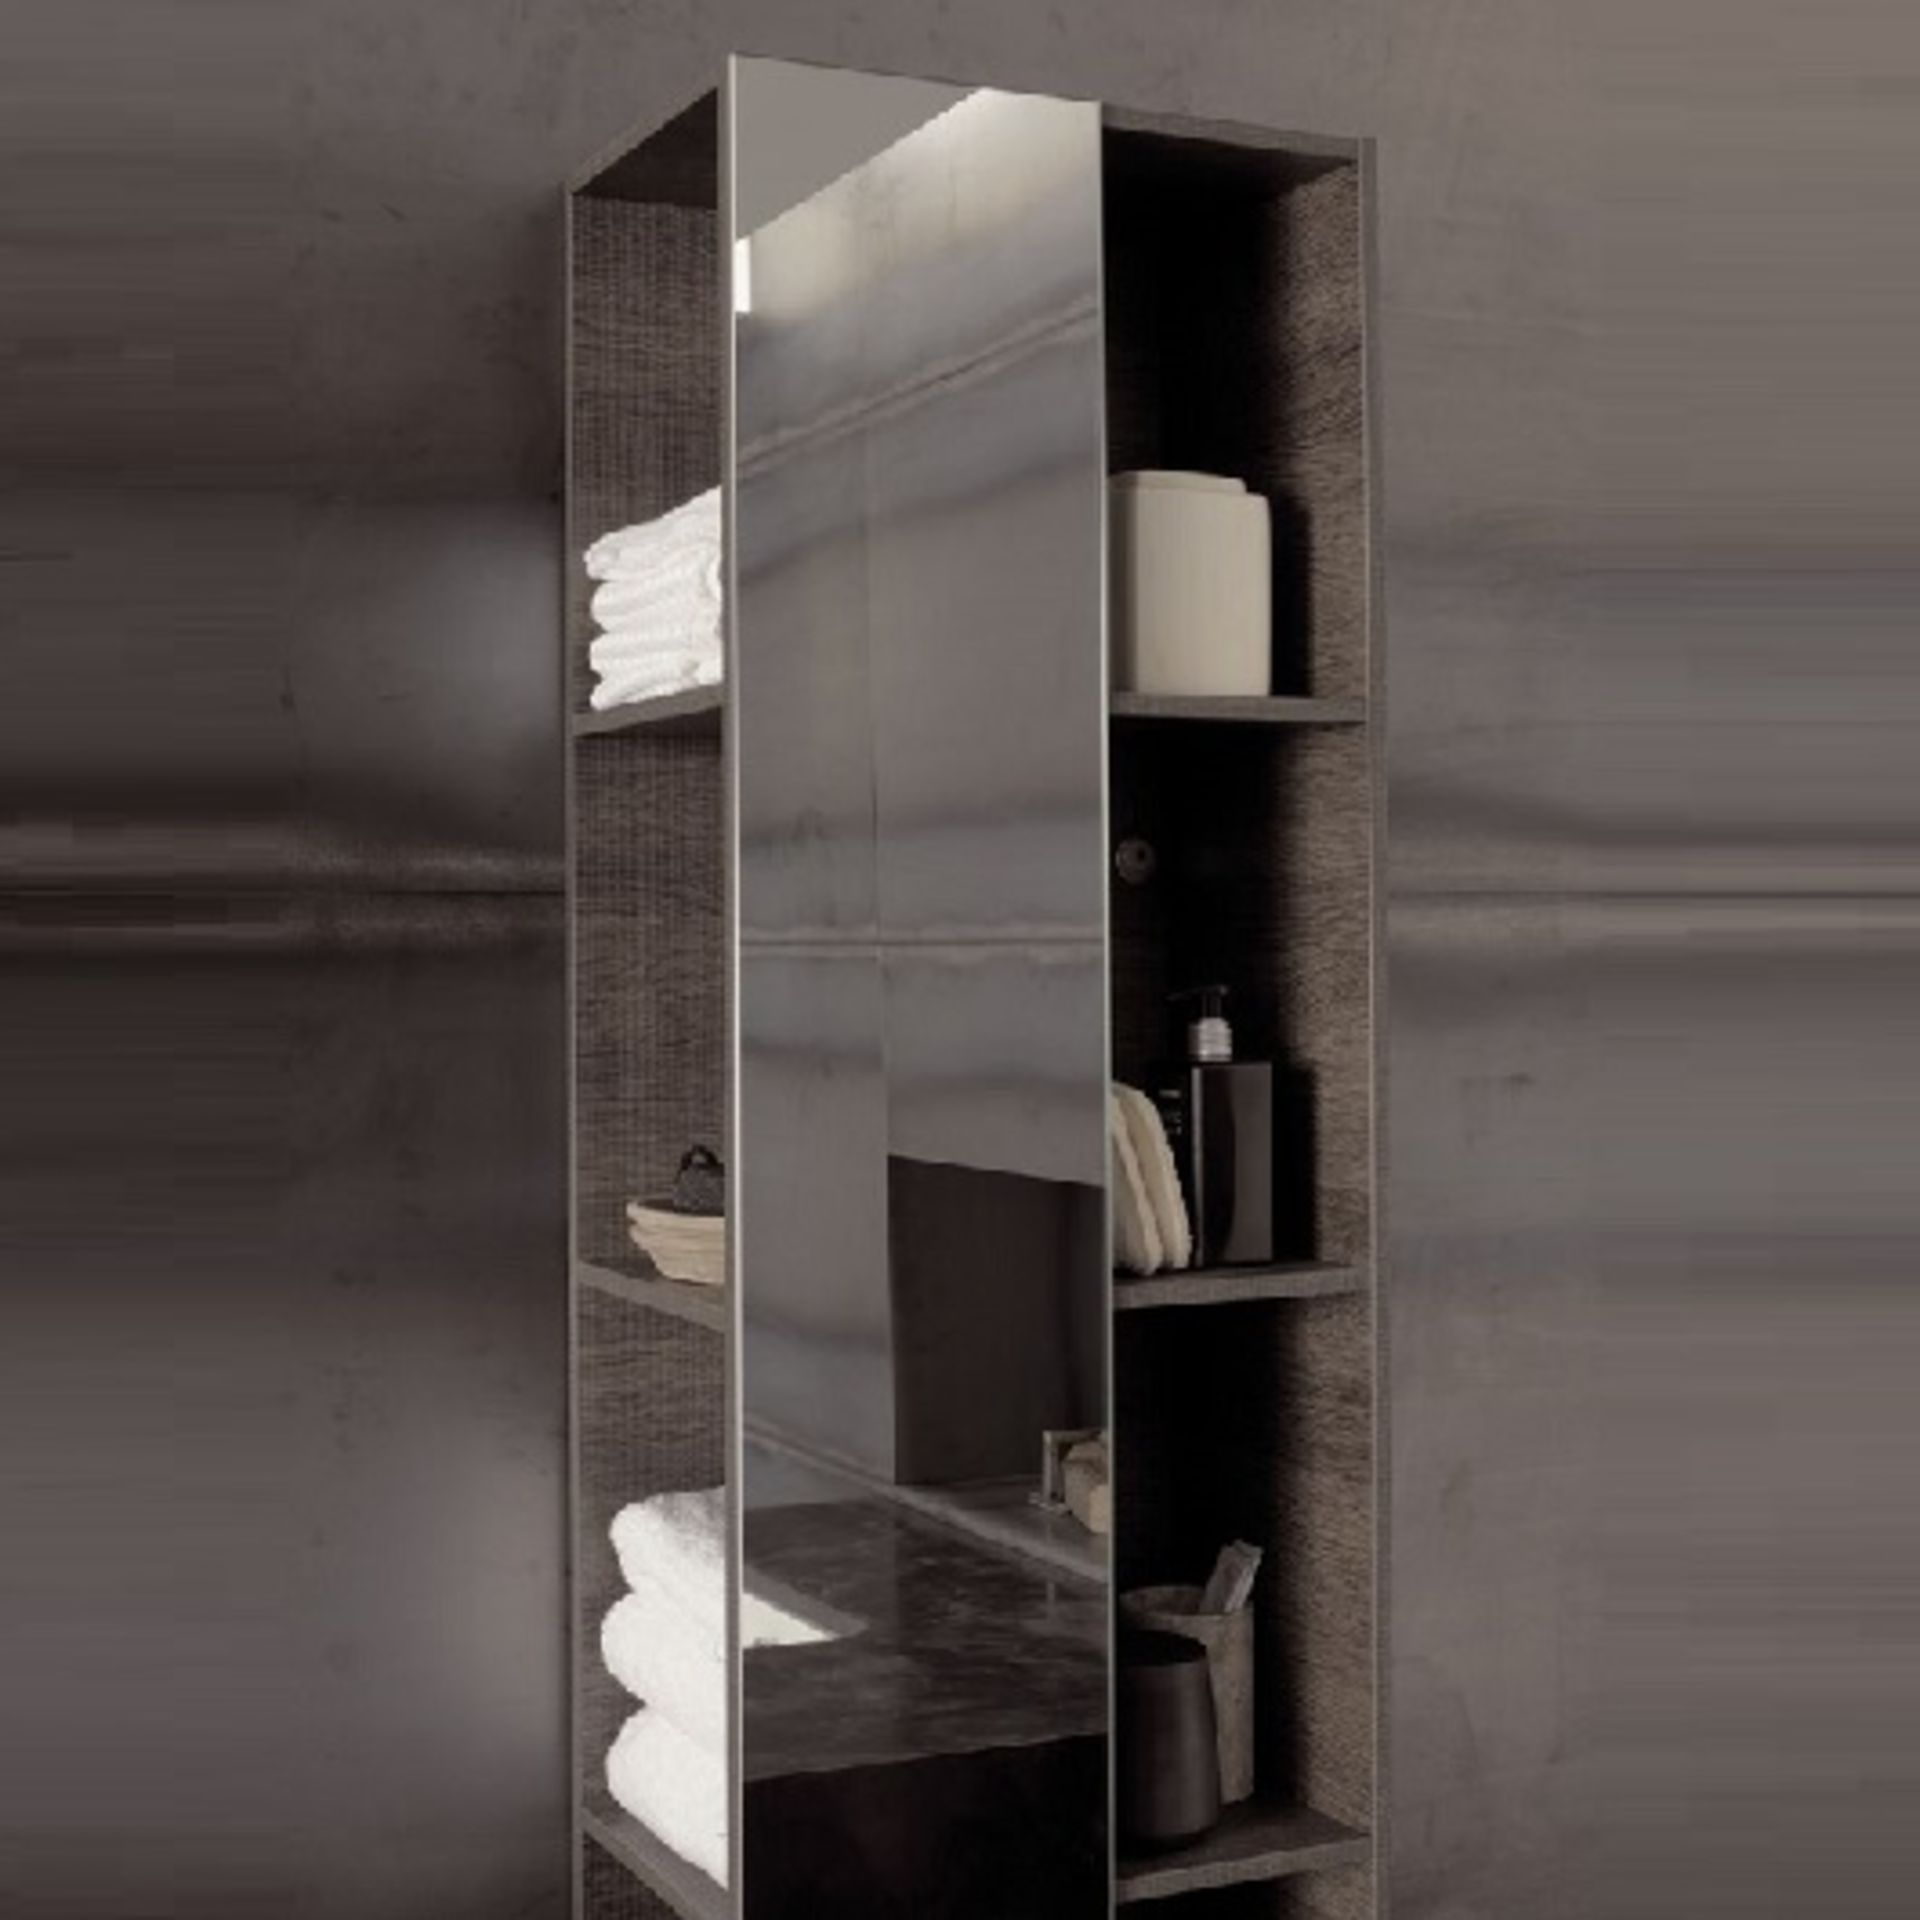 (UR6) Keramag 1600mm Citterio Tall Shelf Storage Cabinet with Mirror. RRP £911.99. Grey/Brown... - Image 2 of 4